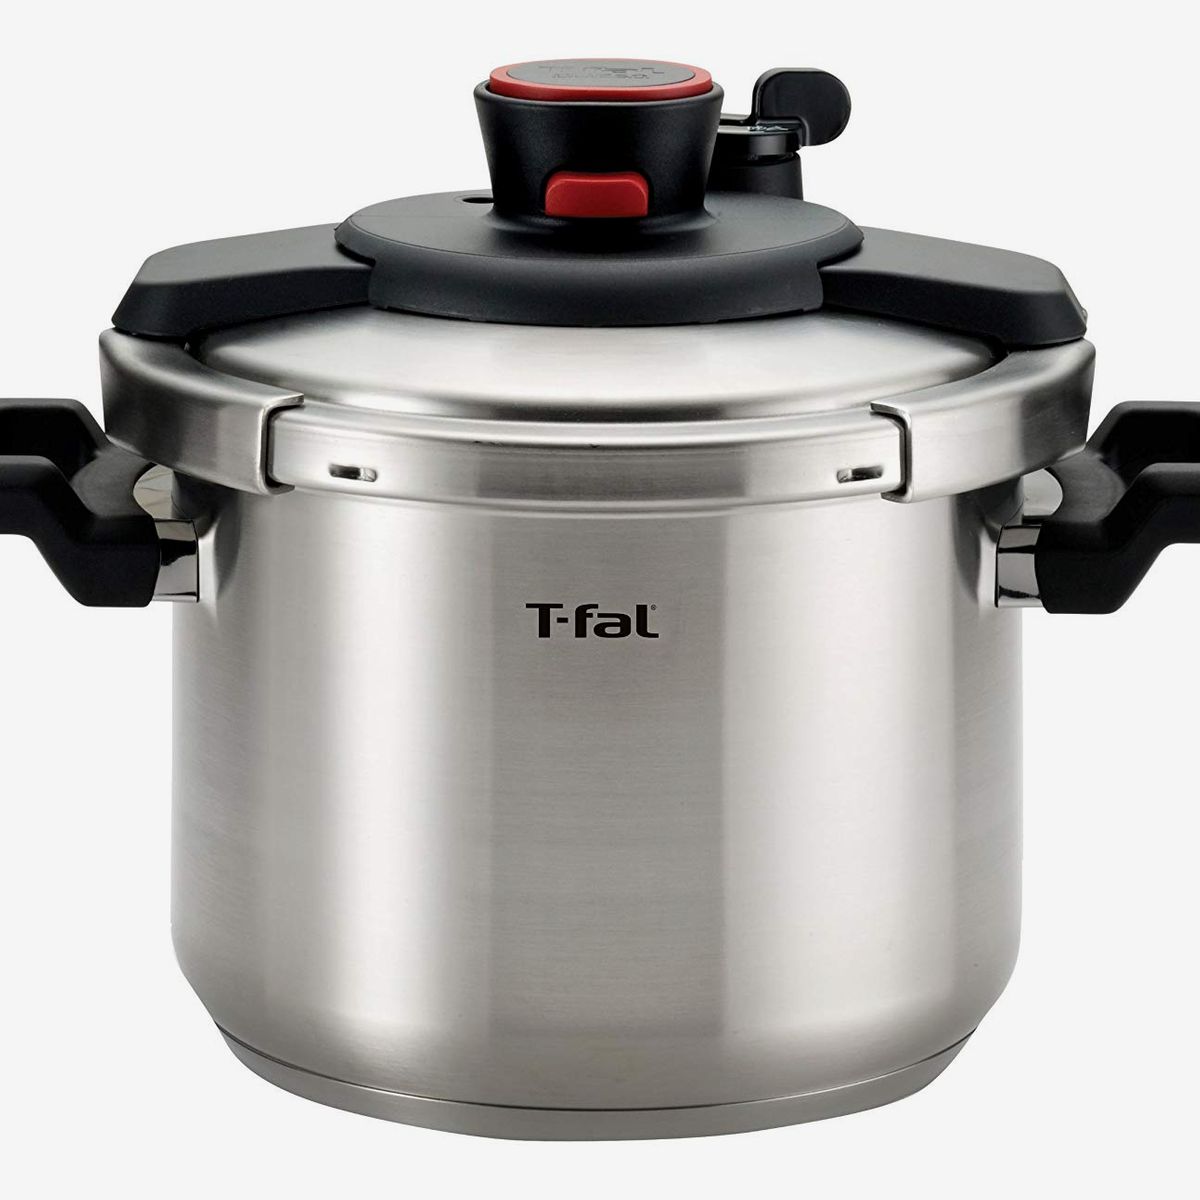 11 Best Pressure Cookers 2020 The Strategist New York Magazine,Diy Projects For Home